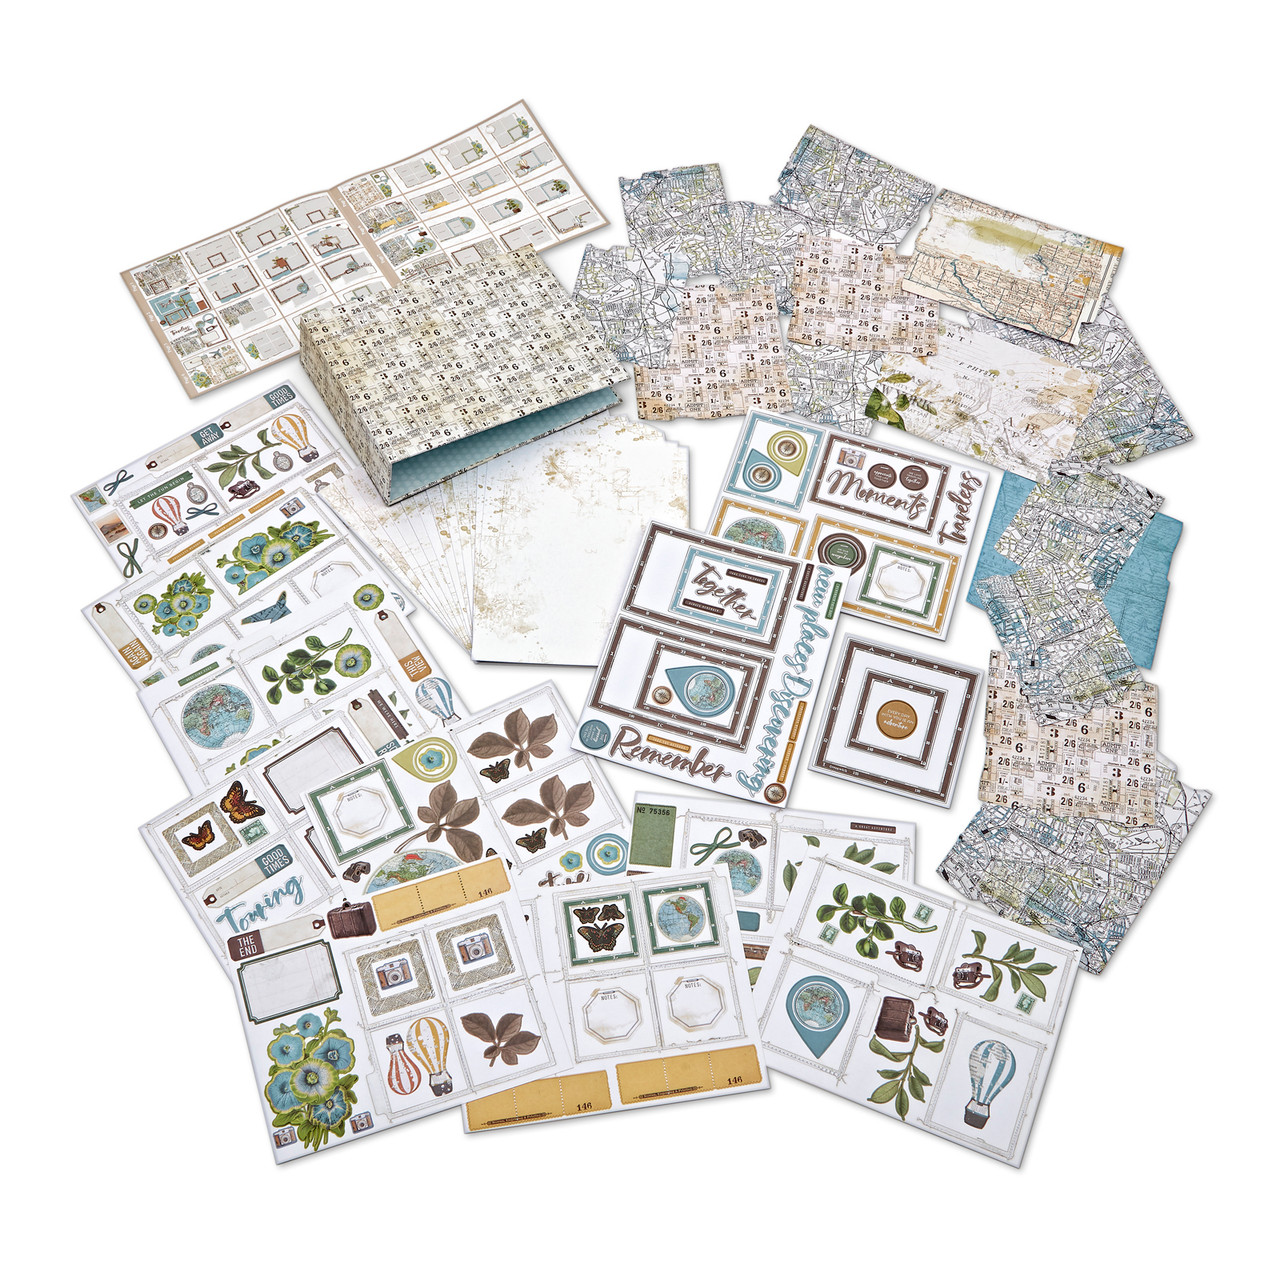 PREORDER - ships late January* 49 AND MARKET Chipboard Set: Wherever -  Scrapbook Generation